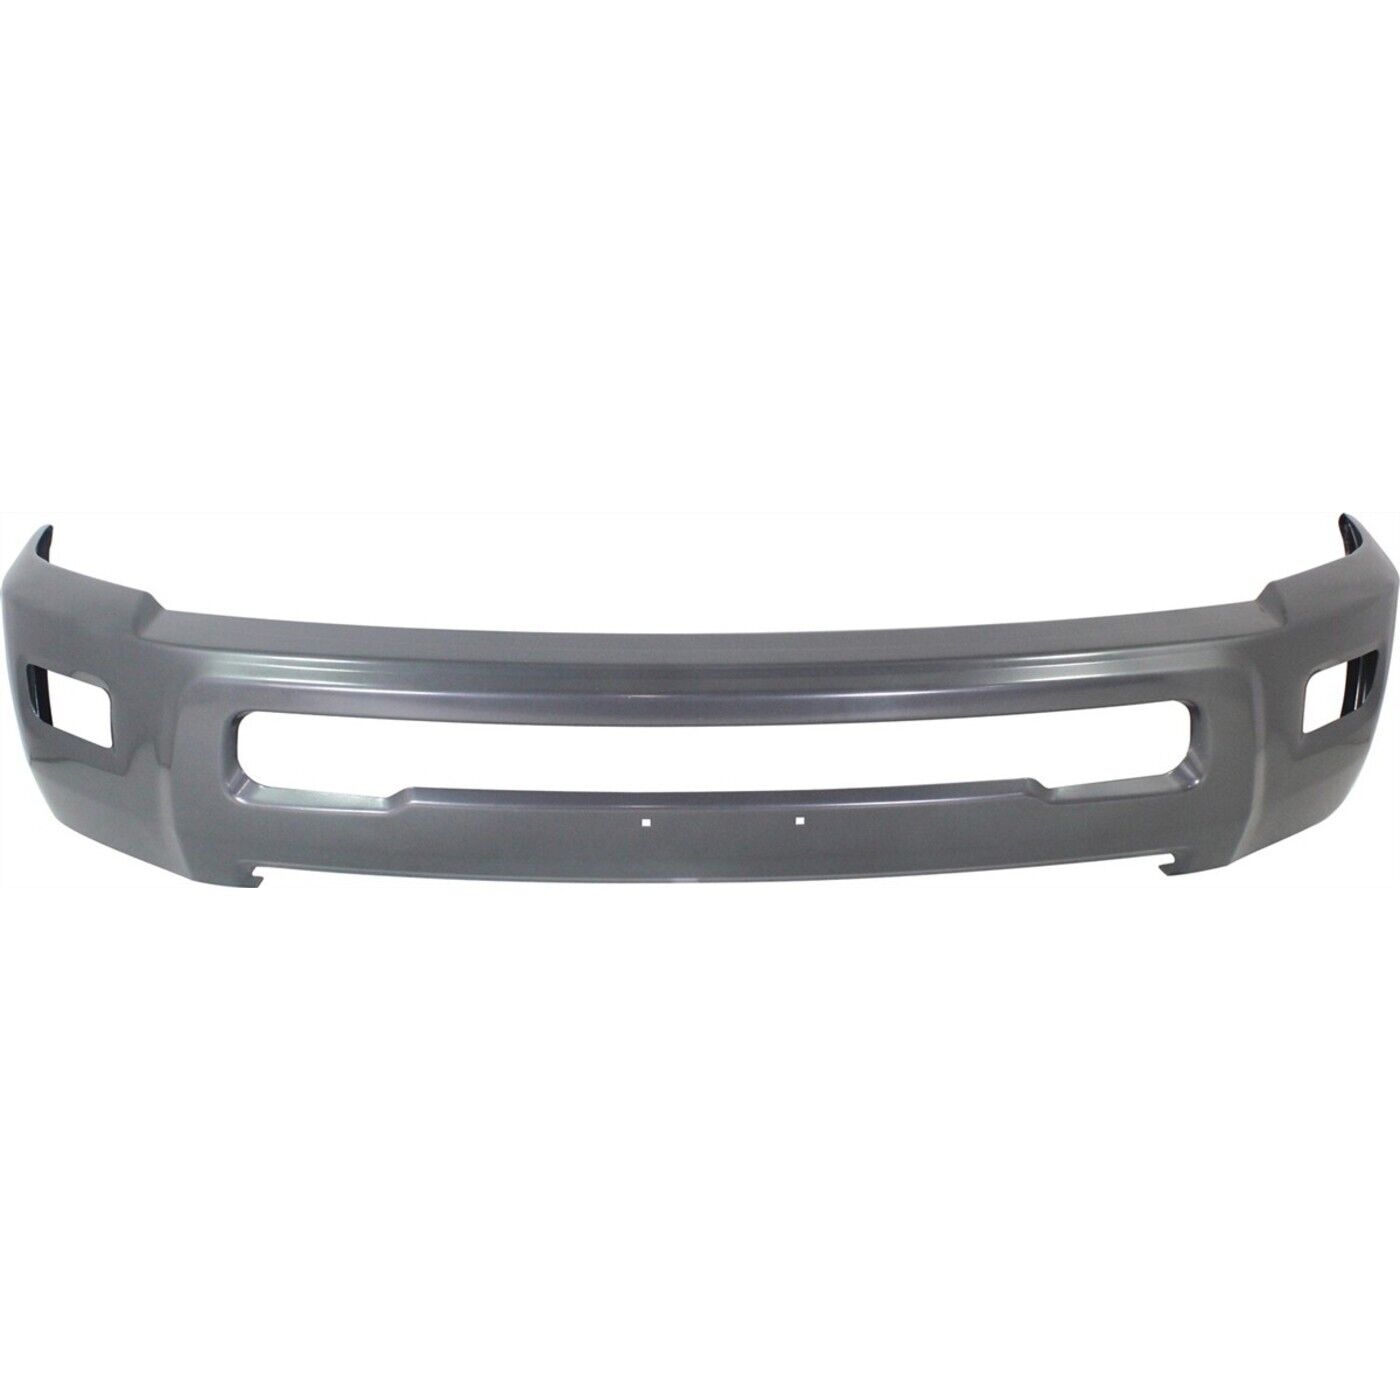 Front Bumper For 2011-2018 Ram 2500 3500 Steel With Fog Light Holes CH1002392